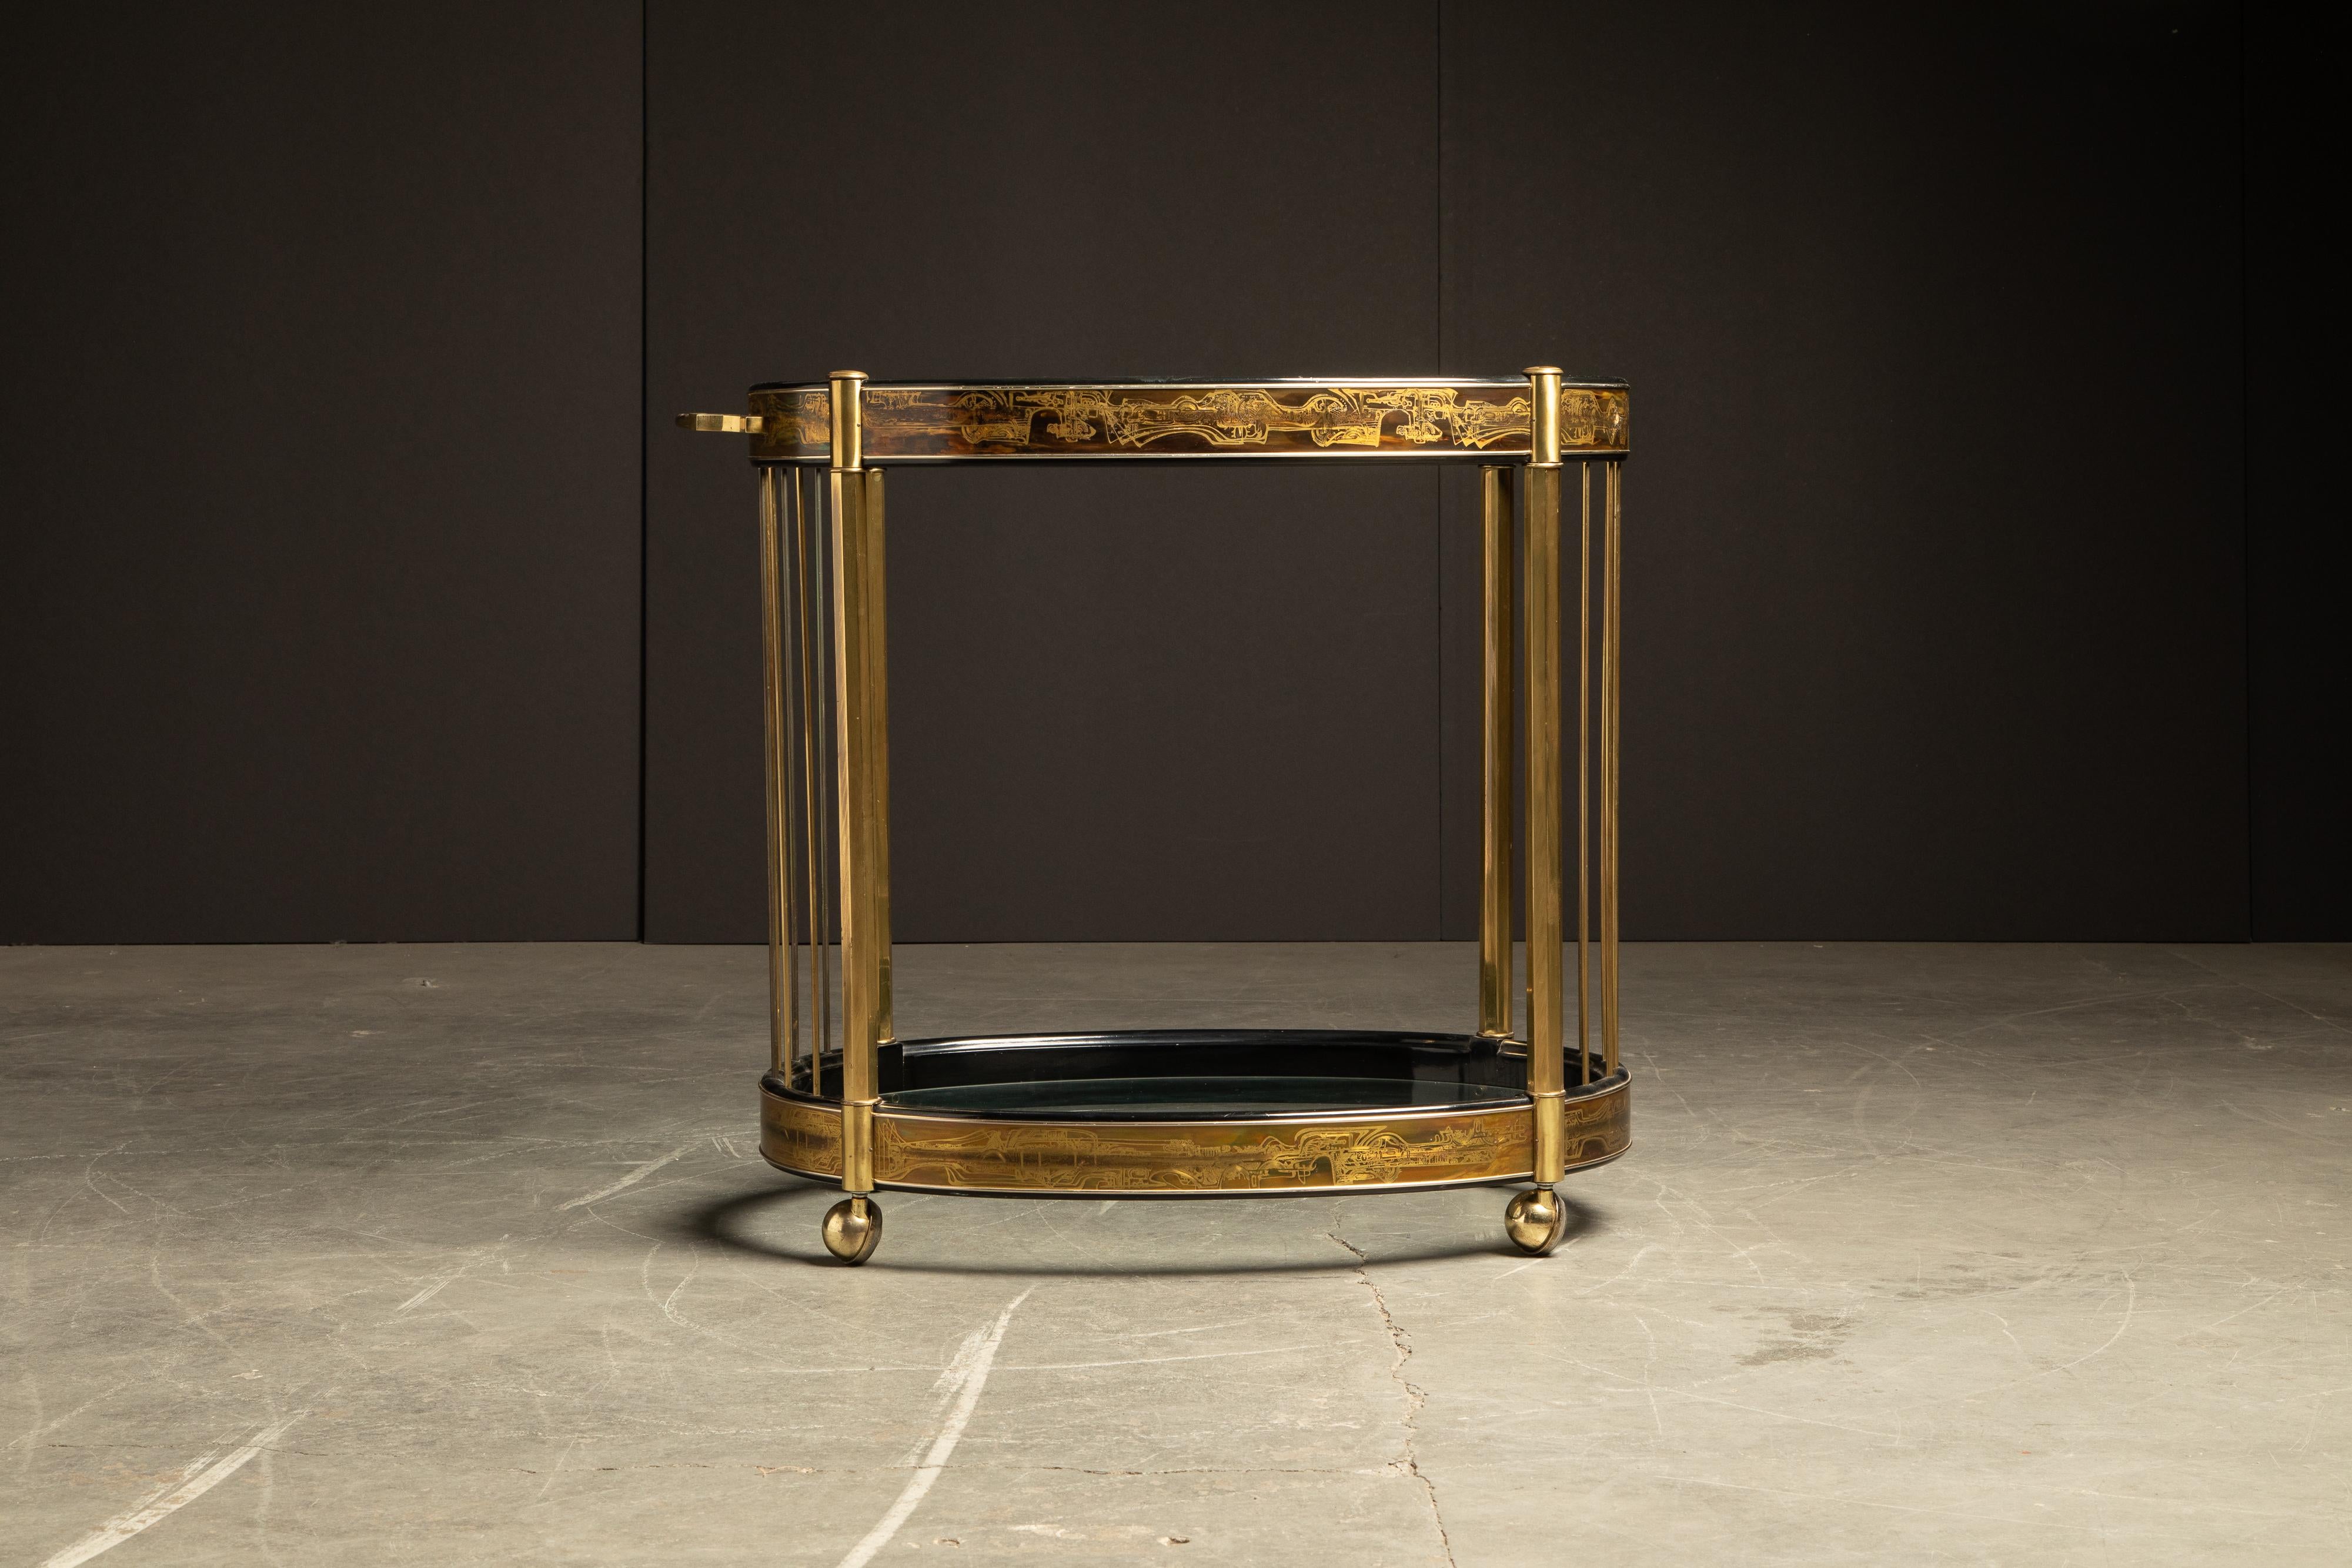 Exquisitely executed oval bar cart by Bernhard Rohne for Mastercraft. Featuring black lacquered and acid etched wrapped brass panels displaying an abstract freeform design. The cart has gleaming brass legs and brass rods that support the two glass